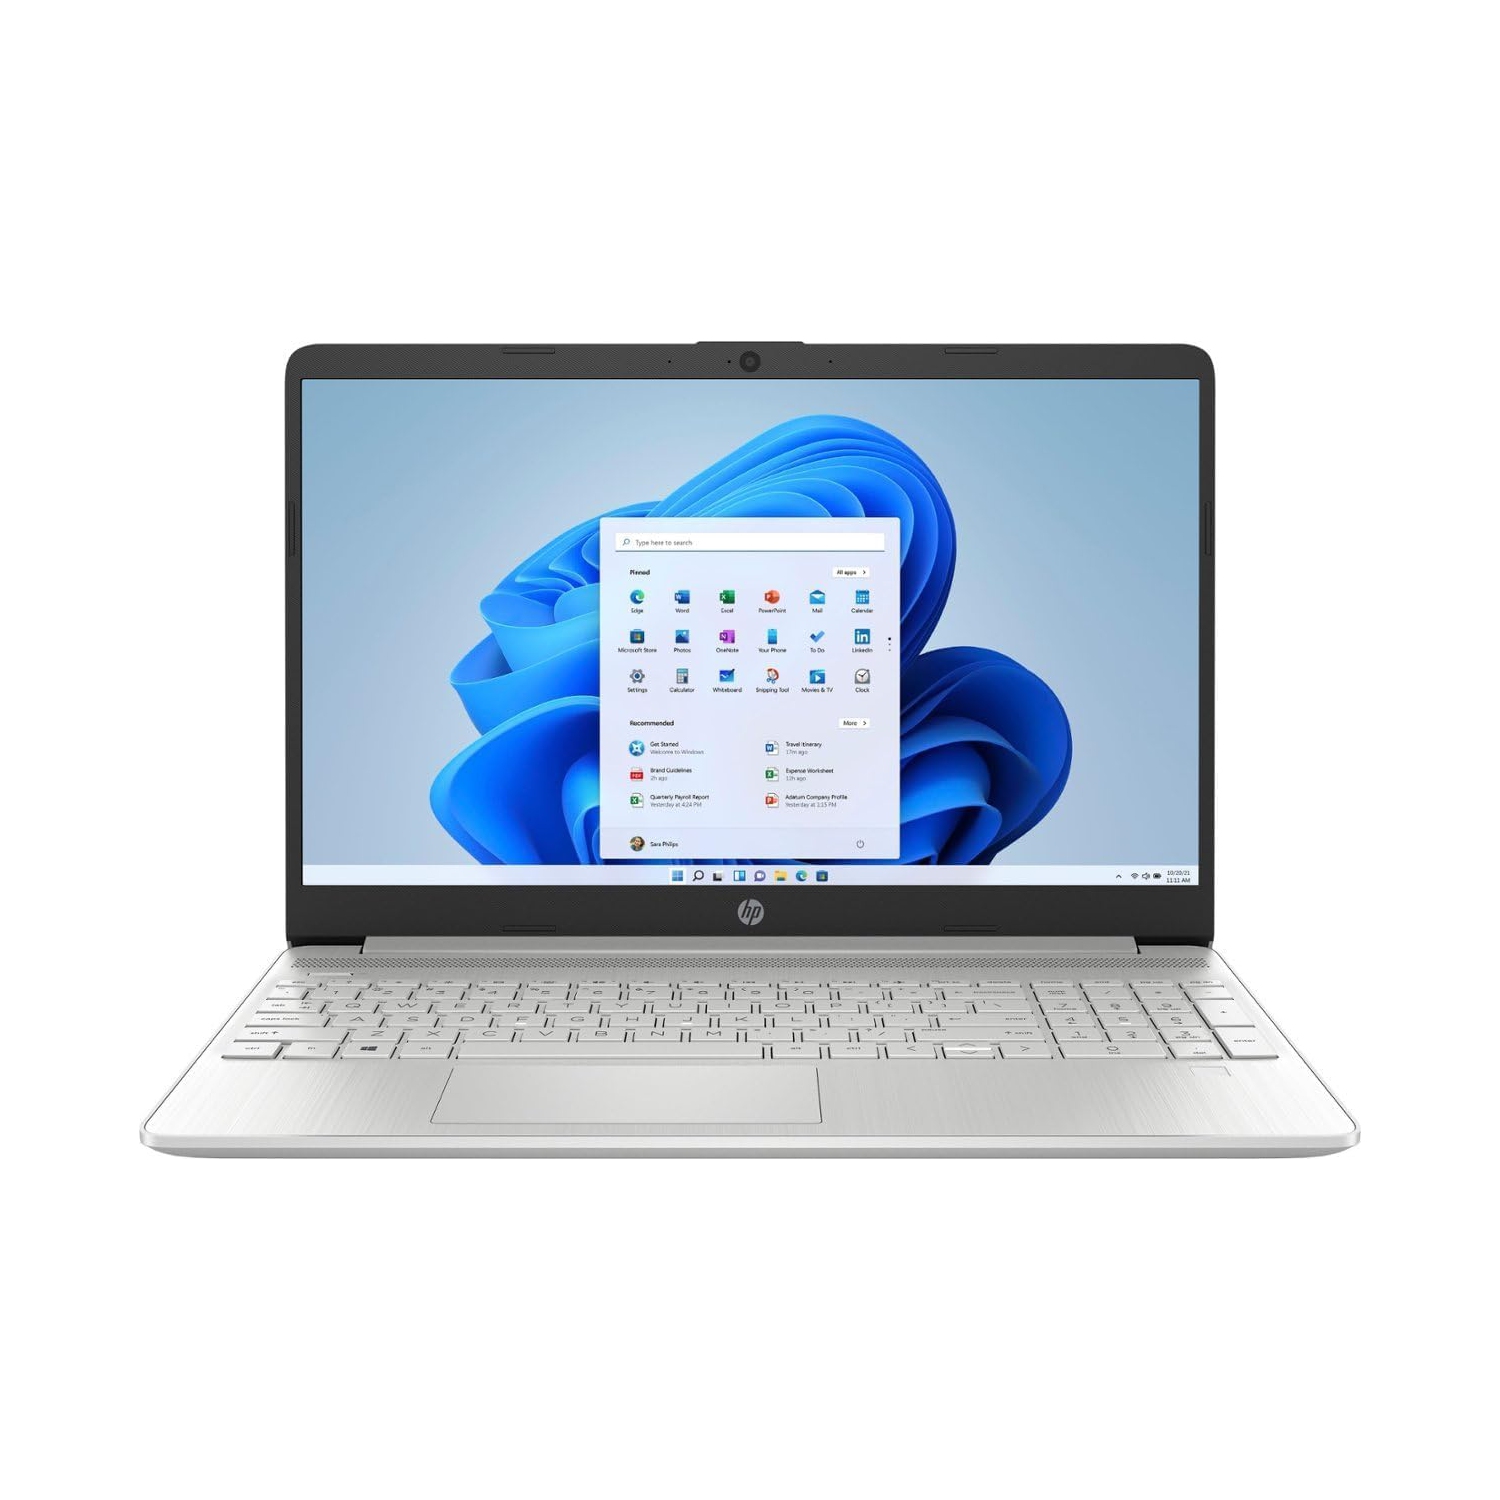 HP - 15.6" Touch-Screen Laptop - Intel Core 6-Core i3 -1215u Up to 4.4GHz - 16GB Memory - 1TB SSD - Natural Silver, Intel UHD Graphics, Fingerprint Reader, Windows 11 Home